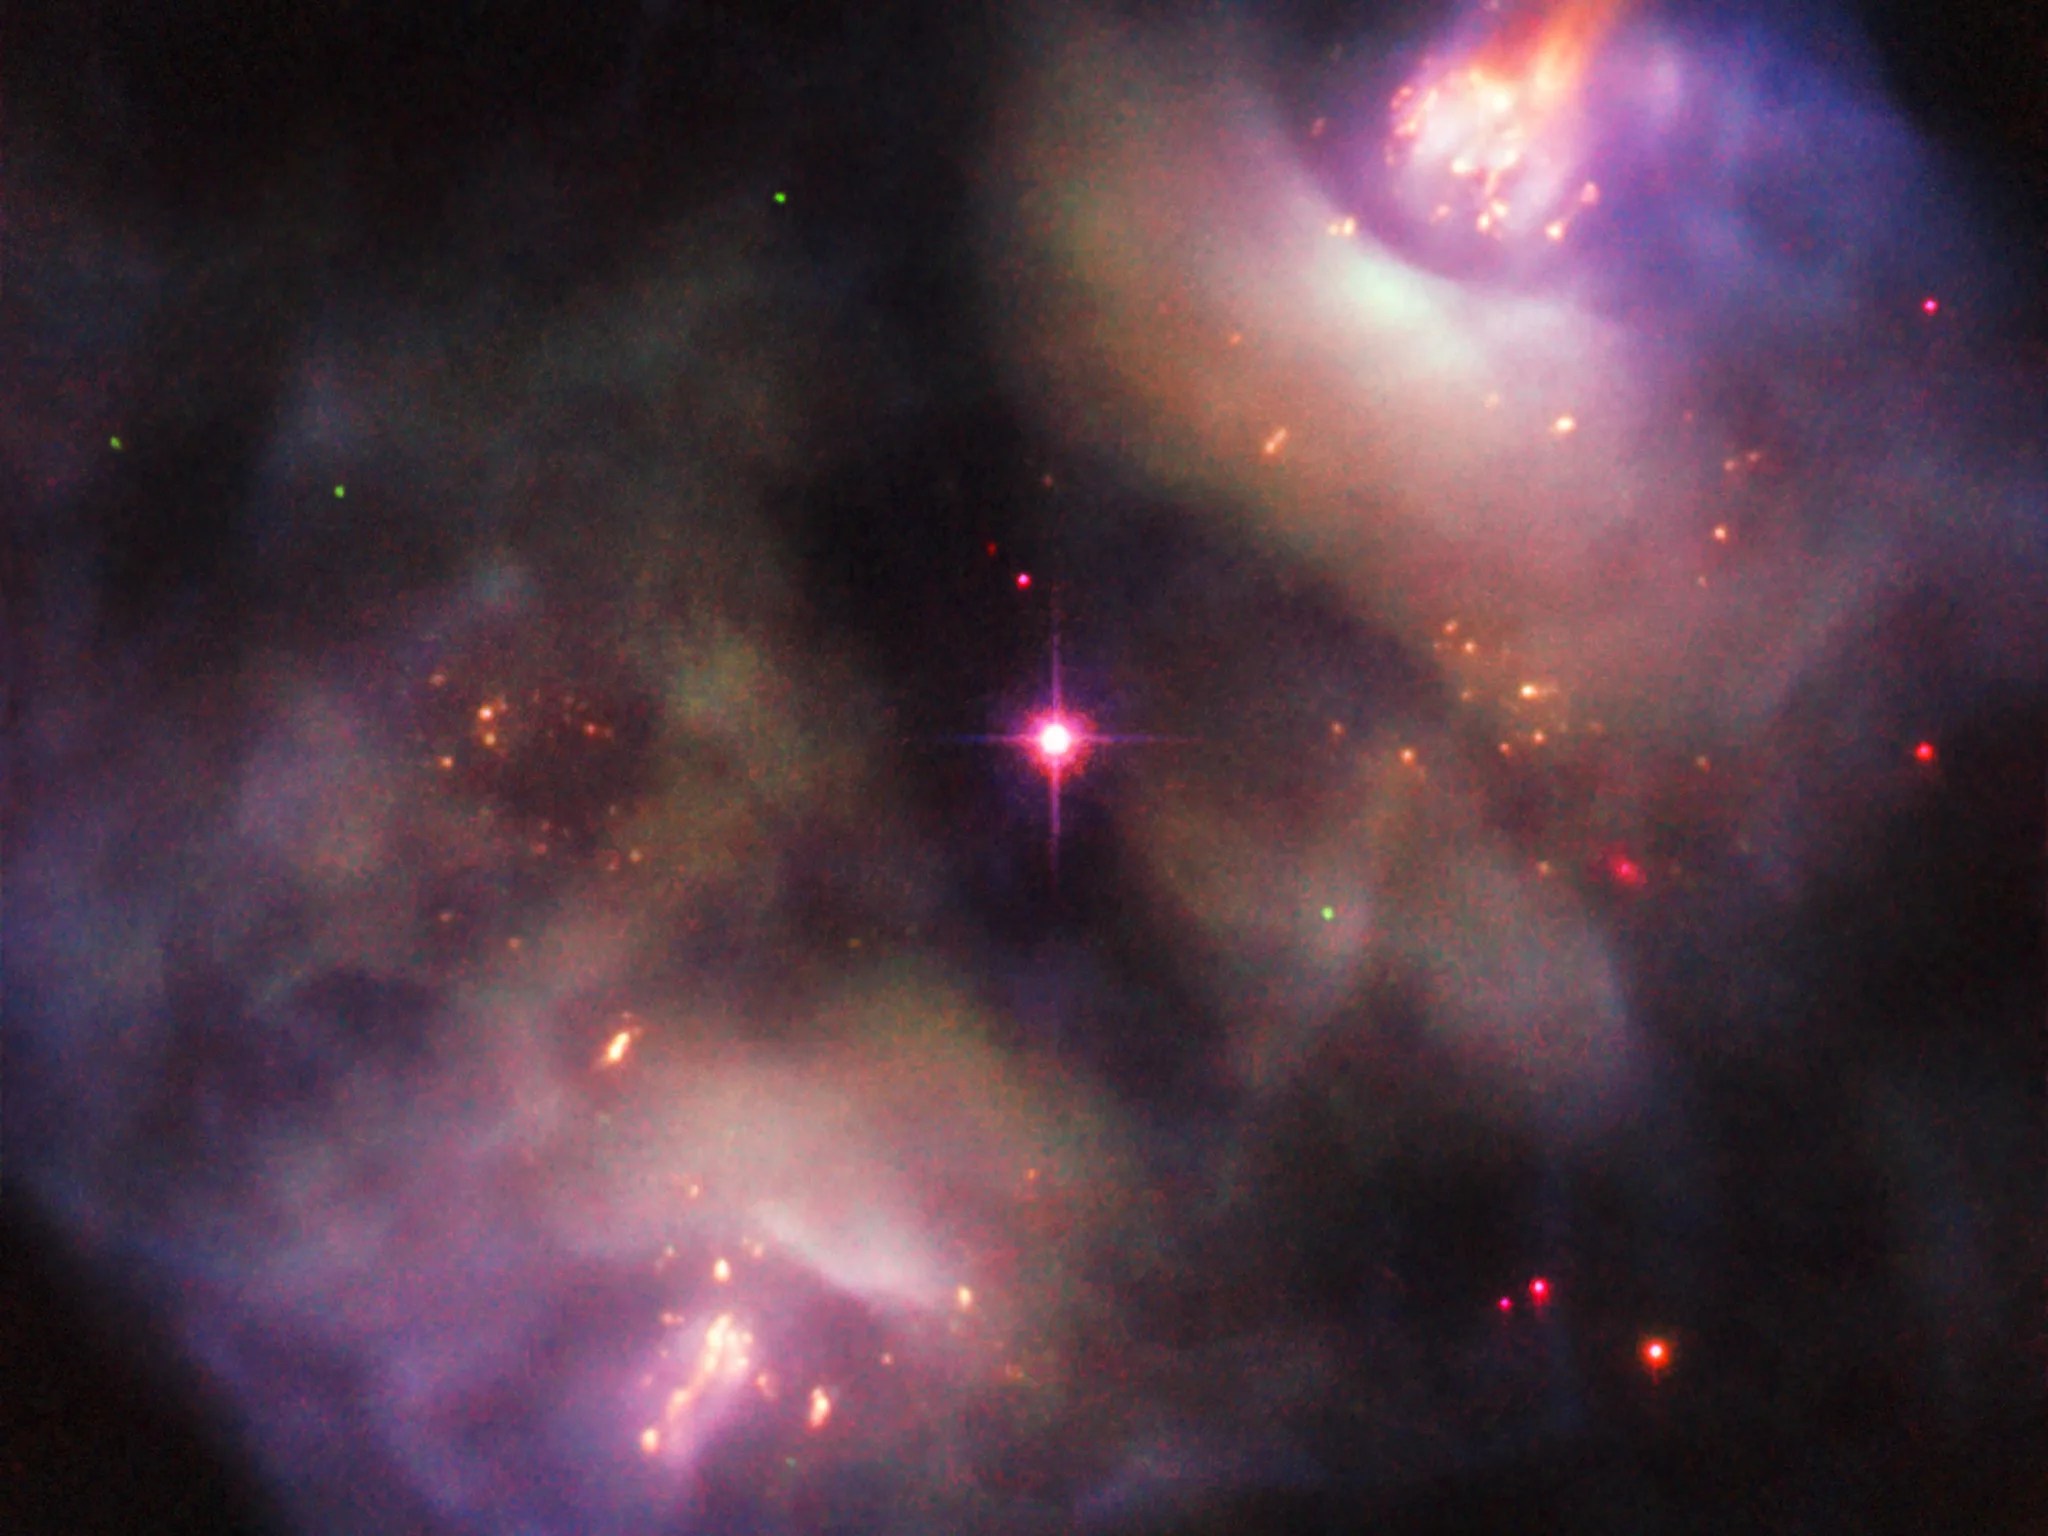 This atmospheric Picture of the Week, taken with the NASA/ESA Hubble Space Telescope, shows a dark, gloomy scene in the constellation of Gemini (The Twins). The subject of this image confused astronomers when it was first studied — rather than being classified as a single object, it was instead recorded as two objects, owing to its symmetrical lobed structure (known as NGC 2371 and NGC 2372, though sometimes referred to together as NGC 2371/2).  These two lobes are visible to the upper right and lower left of the frame, and together form something known as a planetary nebula. Despite the name, such nebulae have nothing to do with planets; NGC 2371/2 formed when a Sun-like star reached the end of its life and blasted off its outer layers, shedding the constituent material and pushing it out into space to leave just a superheated stellar remnant behind. This remnant is visible as the orange-tinted star at the centre of the frame, sitting neatly between the two lobes. The structure of this region is complex. It is filled with dense knots of gas, fast-moving jets that appear to be changing direction over time, and expanding clouds of material streaming outwards on diametrically opposite sides of the remnant star. Patches of this scene glow brightly as the remnant star emits energetic radiation that excites the gas within these regions, causing it to light up. This scene will continue to change over the next few thousand years; eventually the knotty lobes will dissipate completely, and the remnant star will cool and dim to form a white dwarf.  Links: Image of NGC 2371 published in 2008 Image of NGC 2371 published 1997